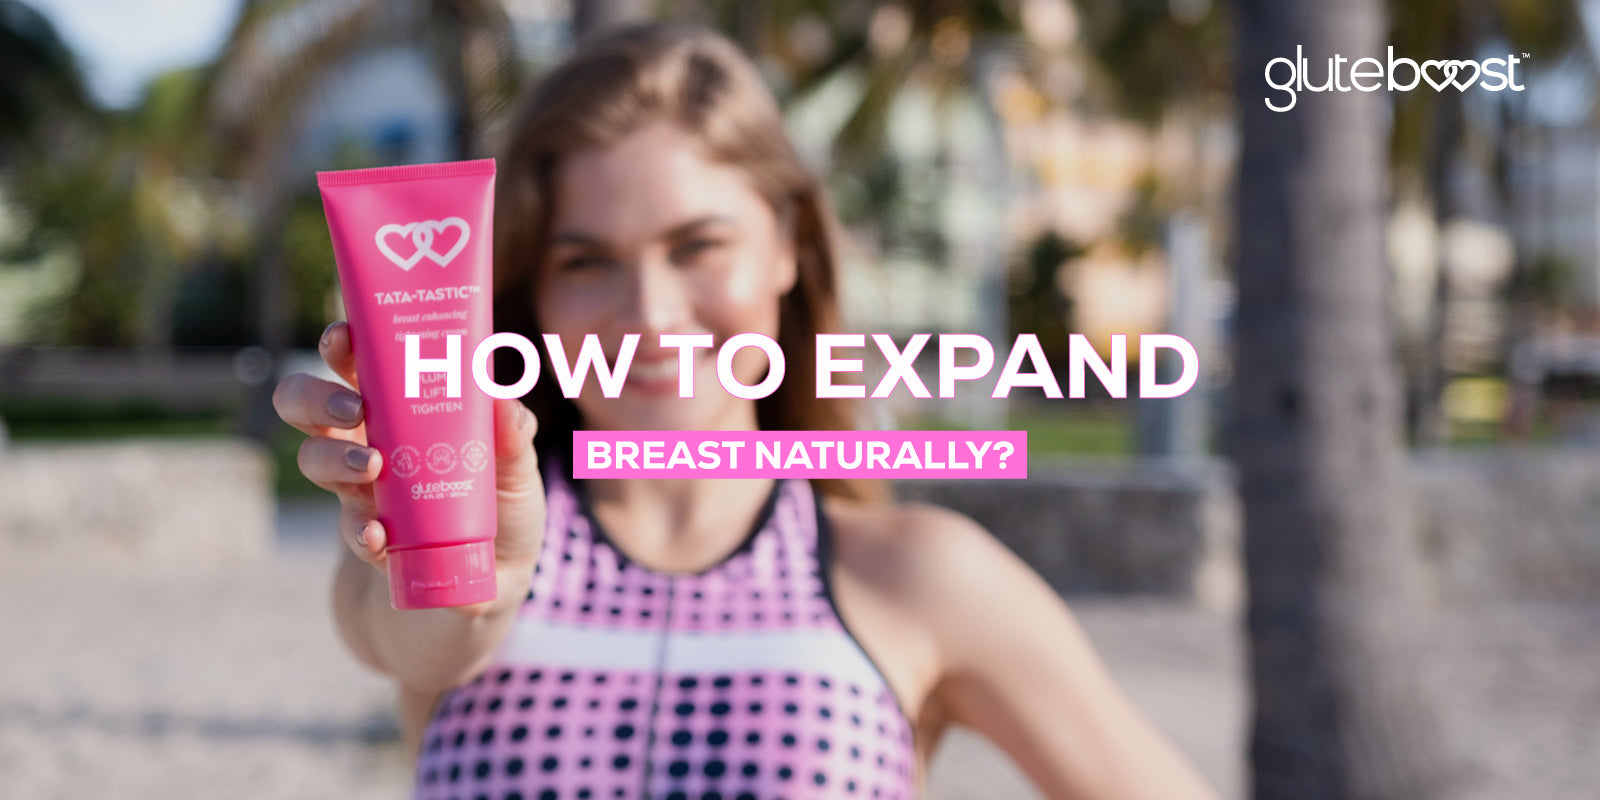 How to Expand Breast Naturally?